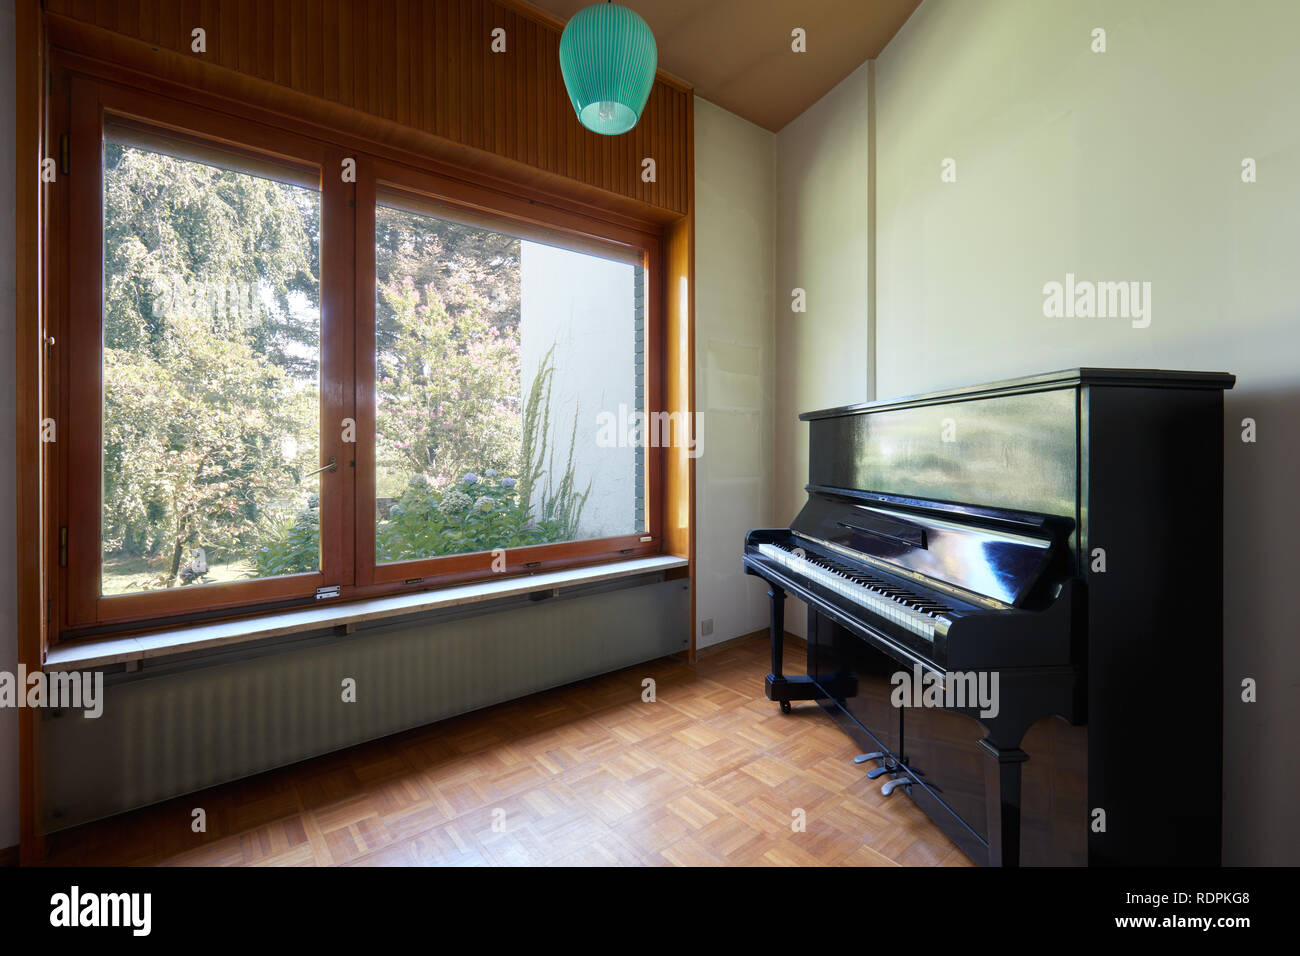 Room with piano and large window, apartment interior in old house with garden Stock Photo